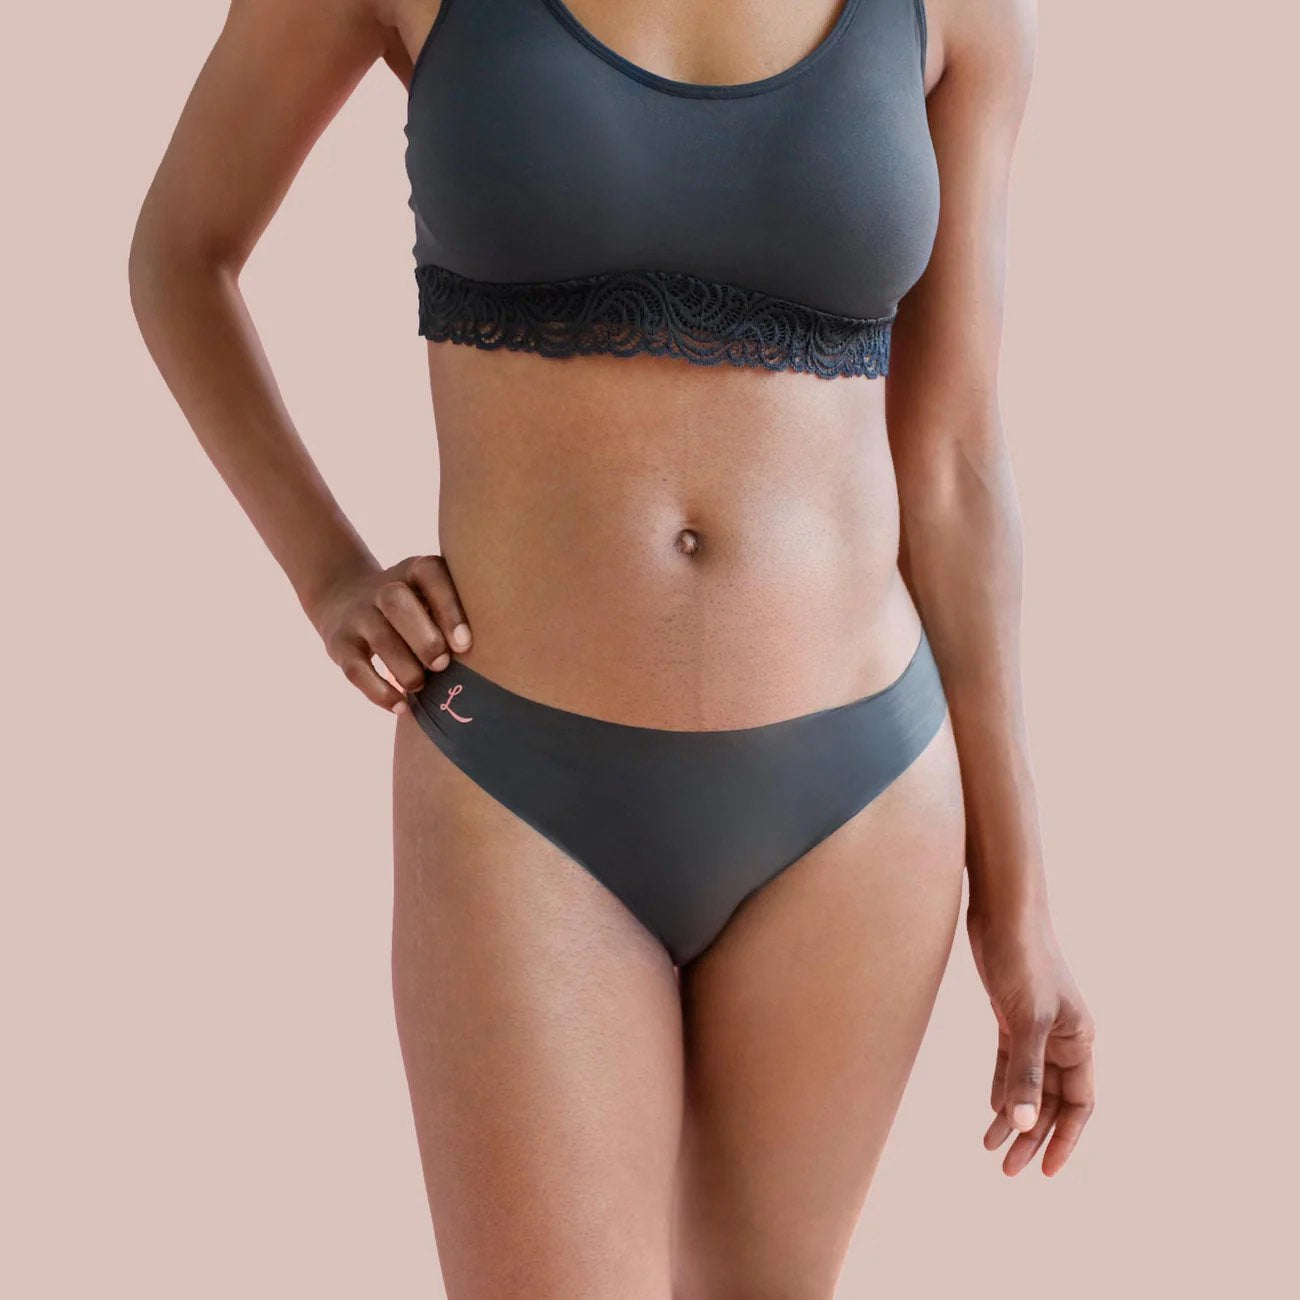 A model wearing the opaque black bikini Lorals Panties For Pleasure and Comfort, front view.